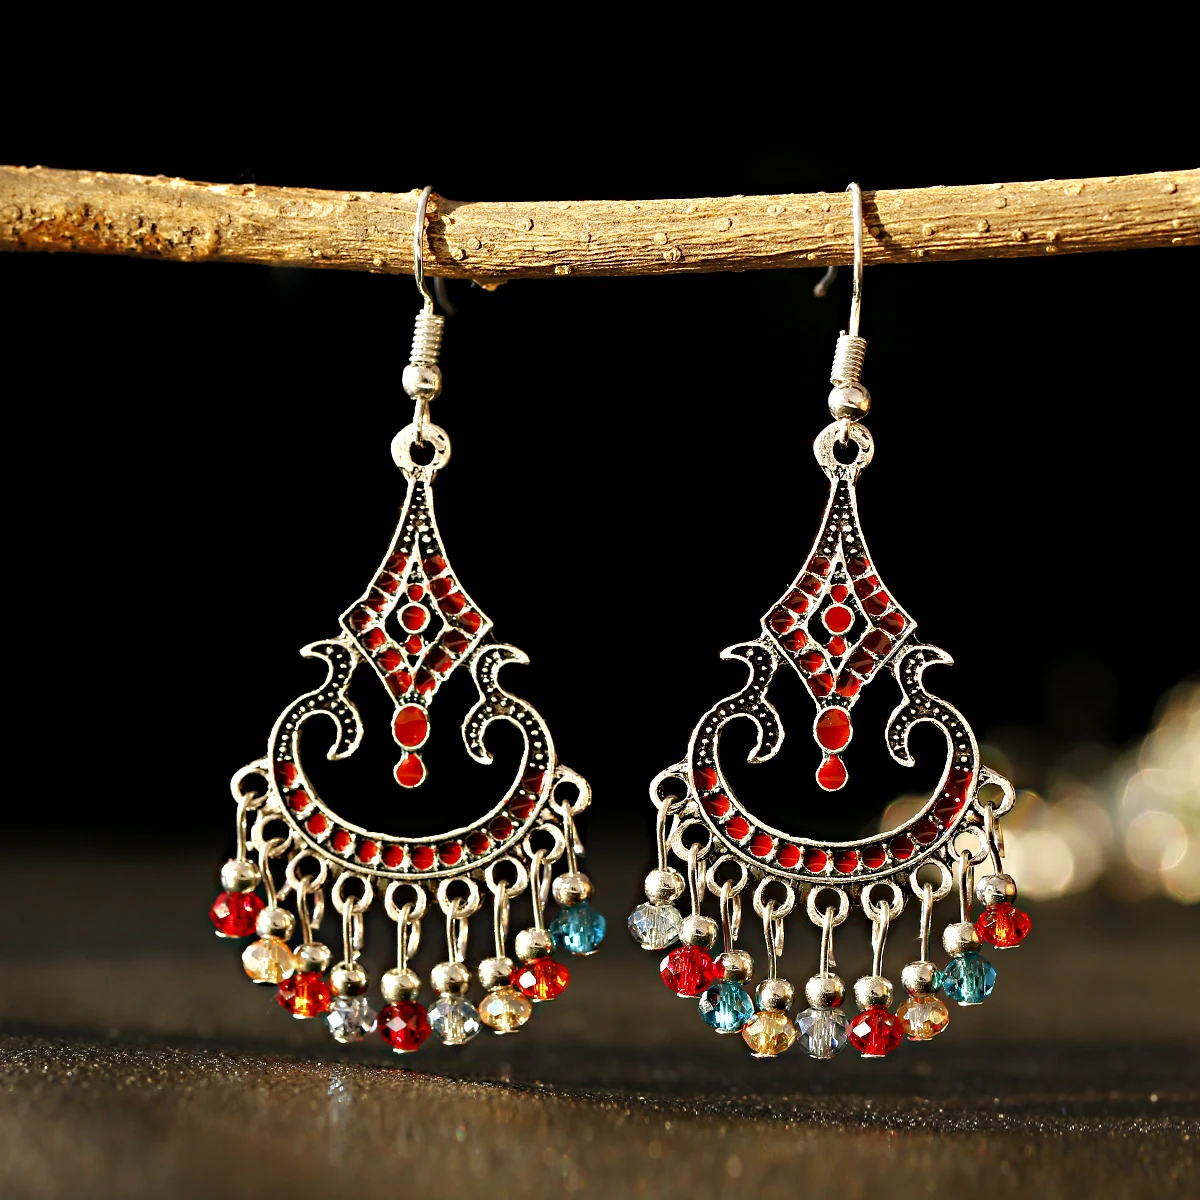 

Women's Vintage Ethnic Carved Jhumka Earrings Indian Jewelry Tribe Bohemia Corful Beads Tassel Earrings, Gold/silver